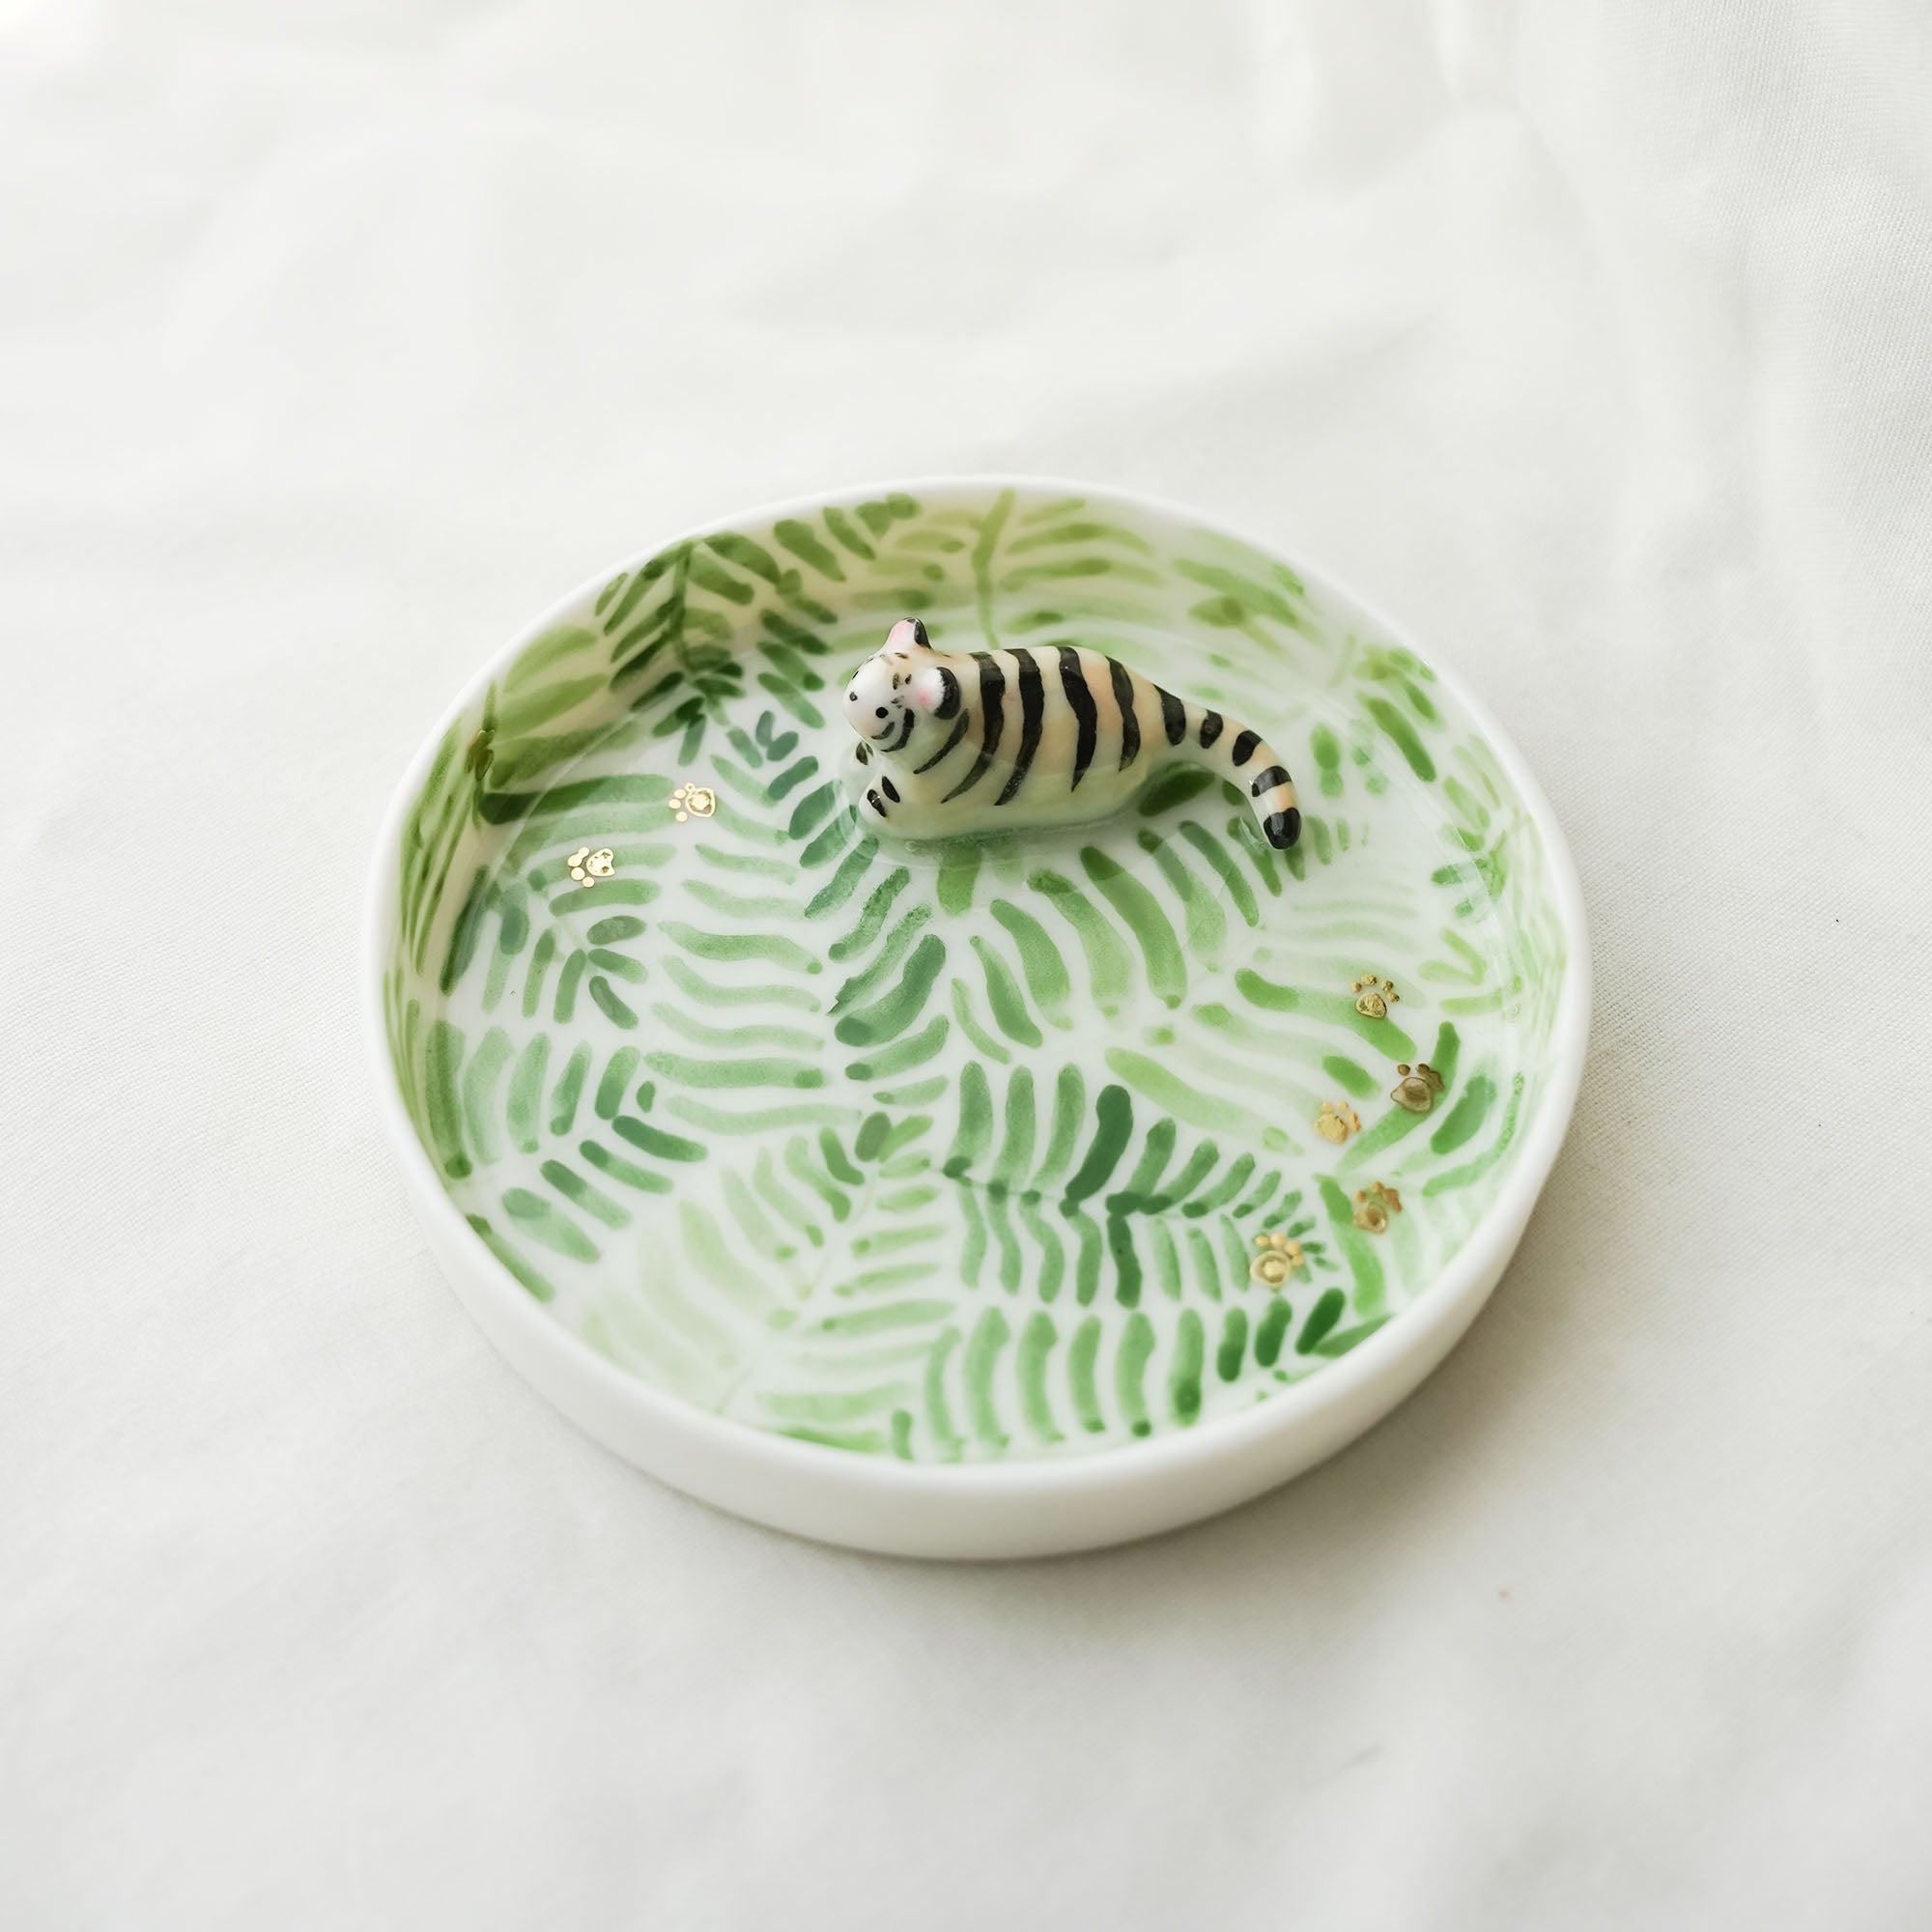 Jewelry tray with a tiger in a jungle